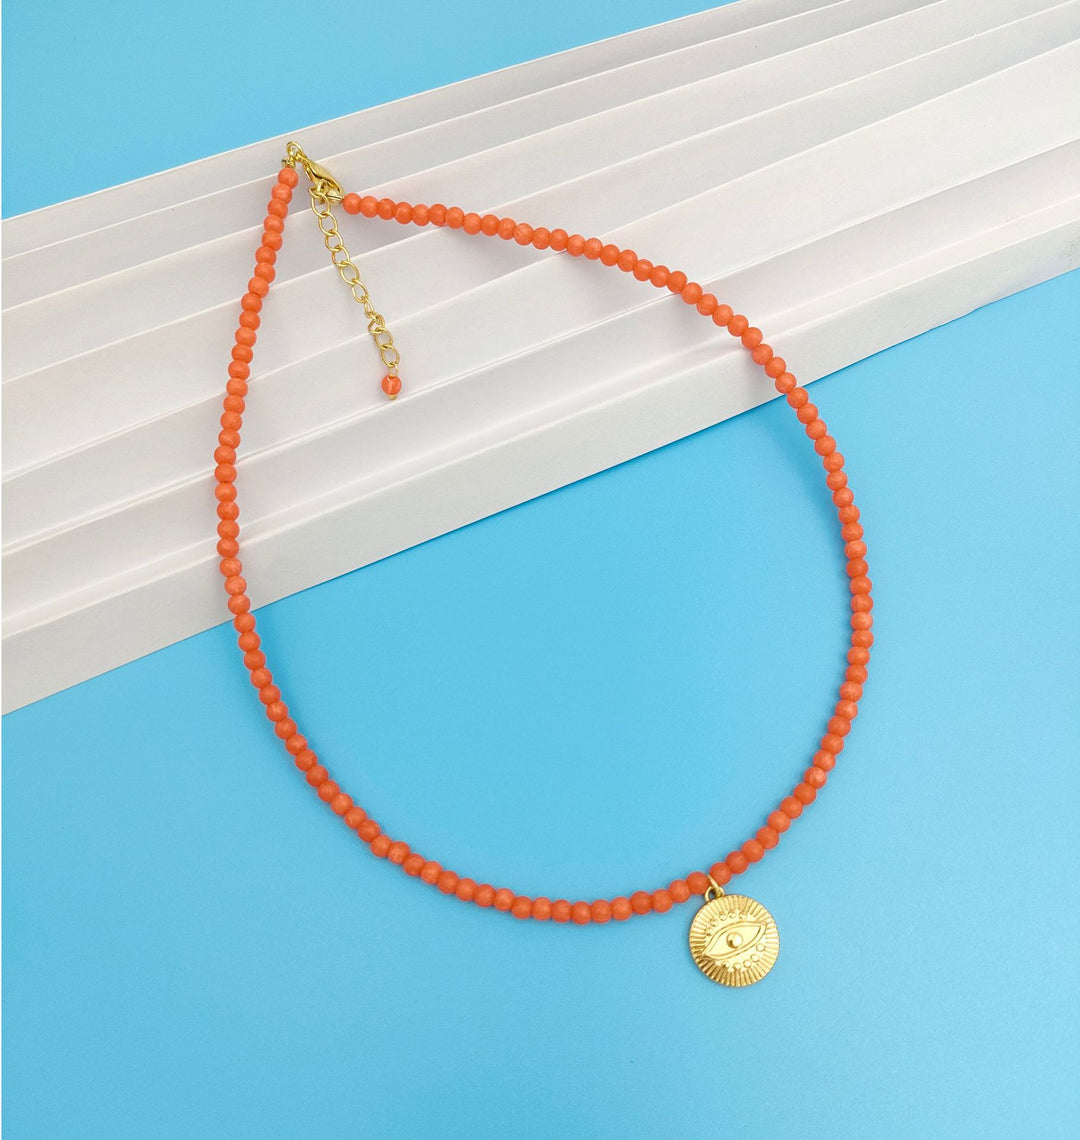 Women's Fashion Vintage Eyes Coral Beads Chain Necklace